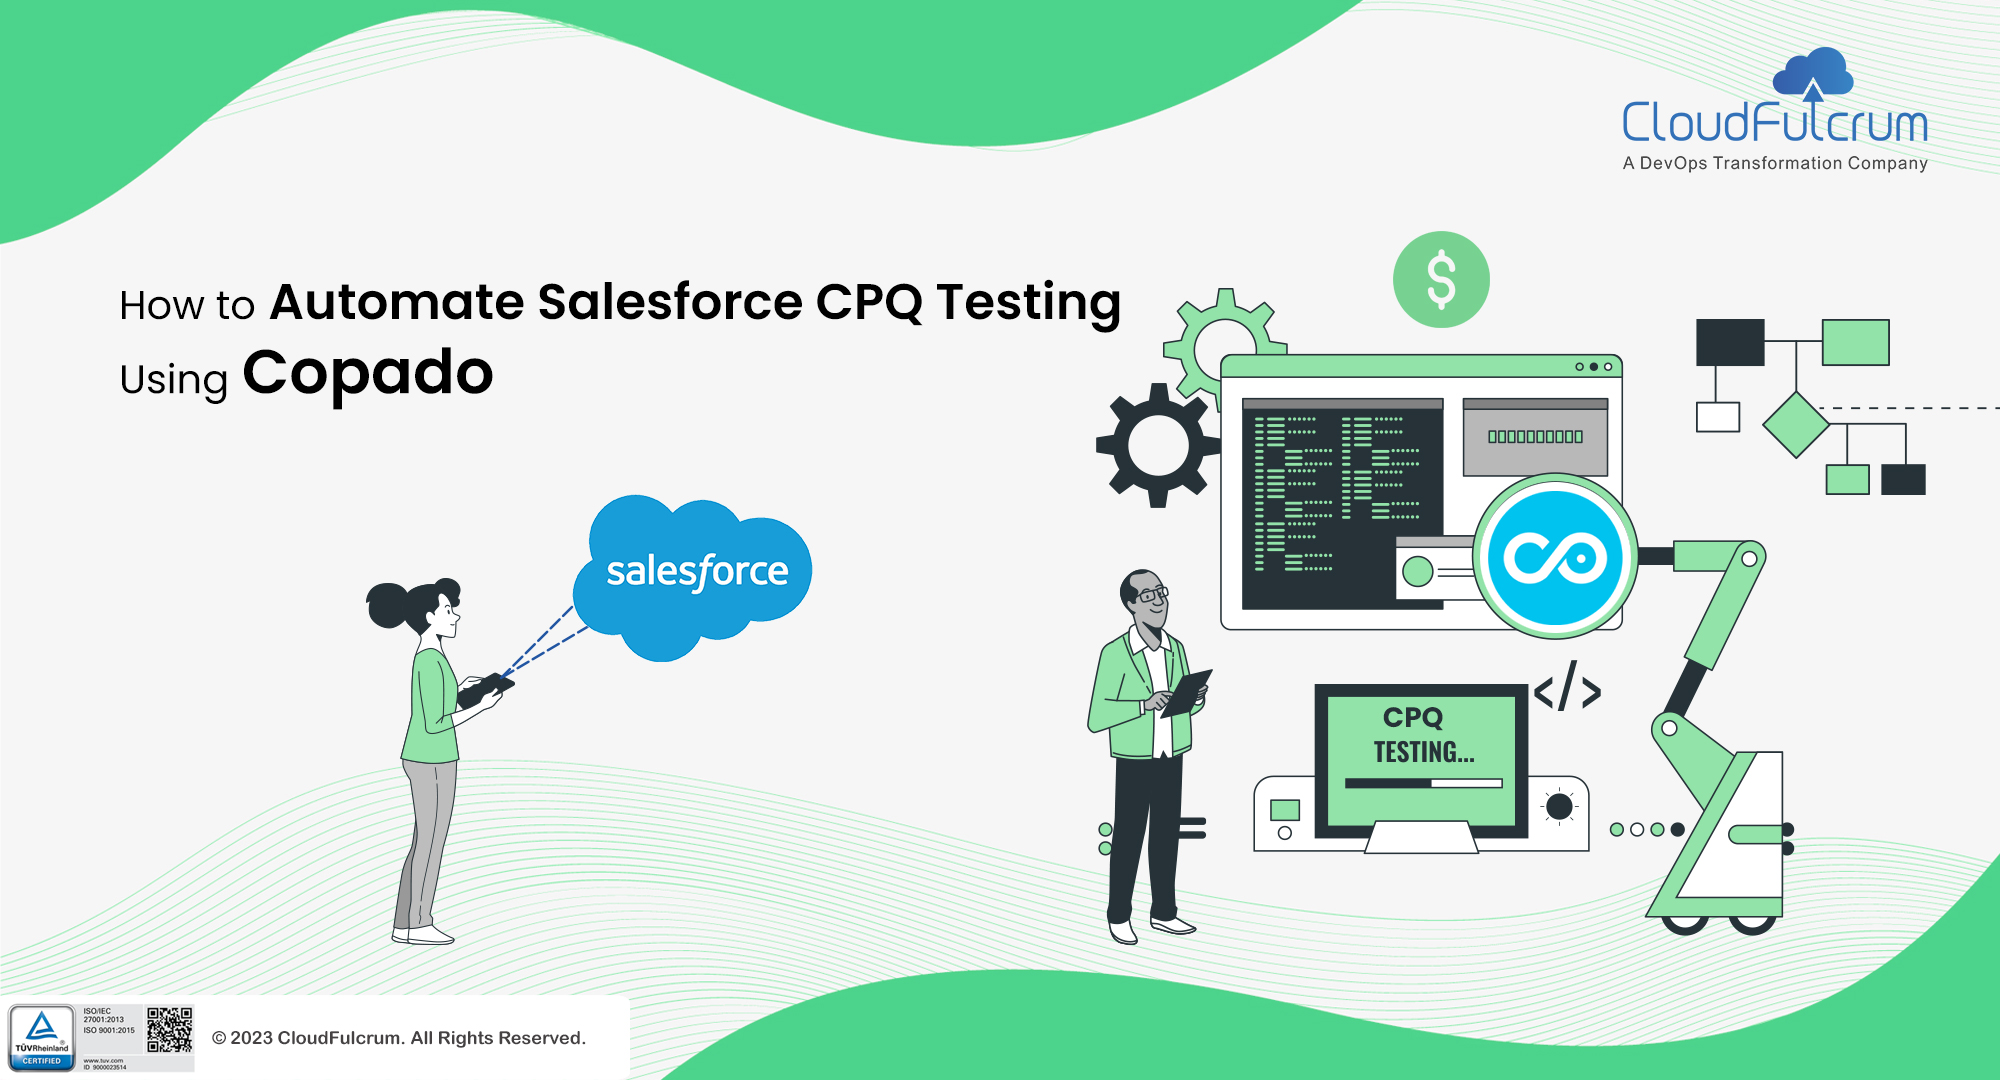 How-to-Automate-Salesforce-CPQ-Testing-USING-COPADO